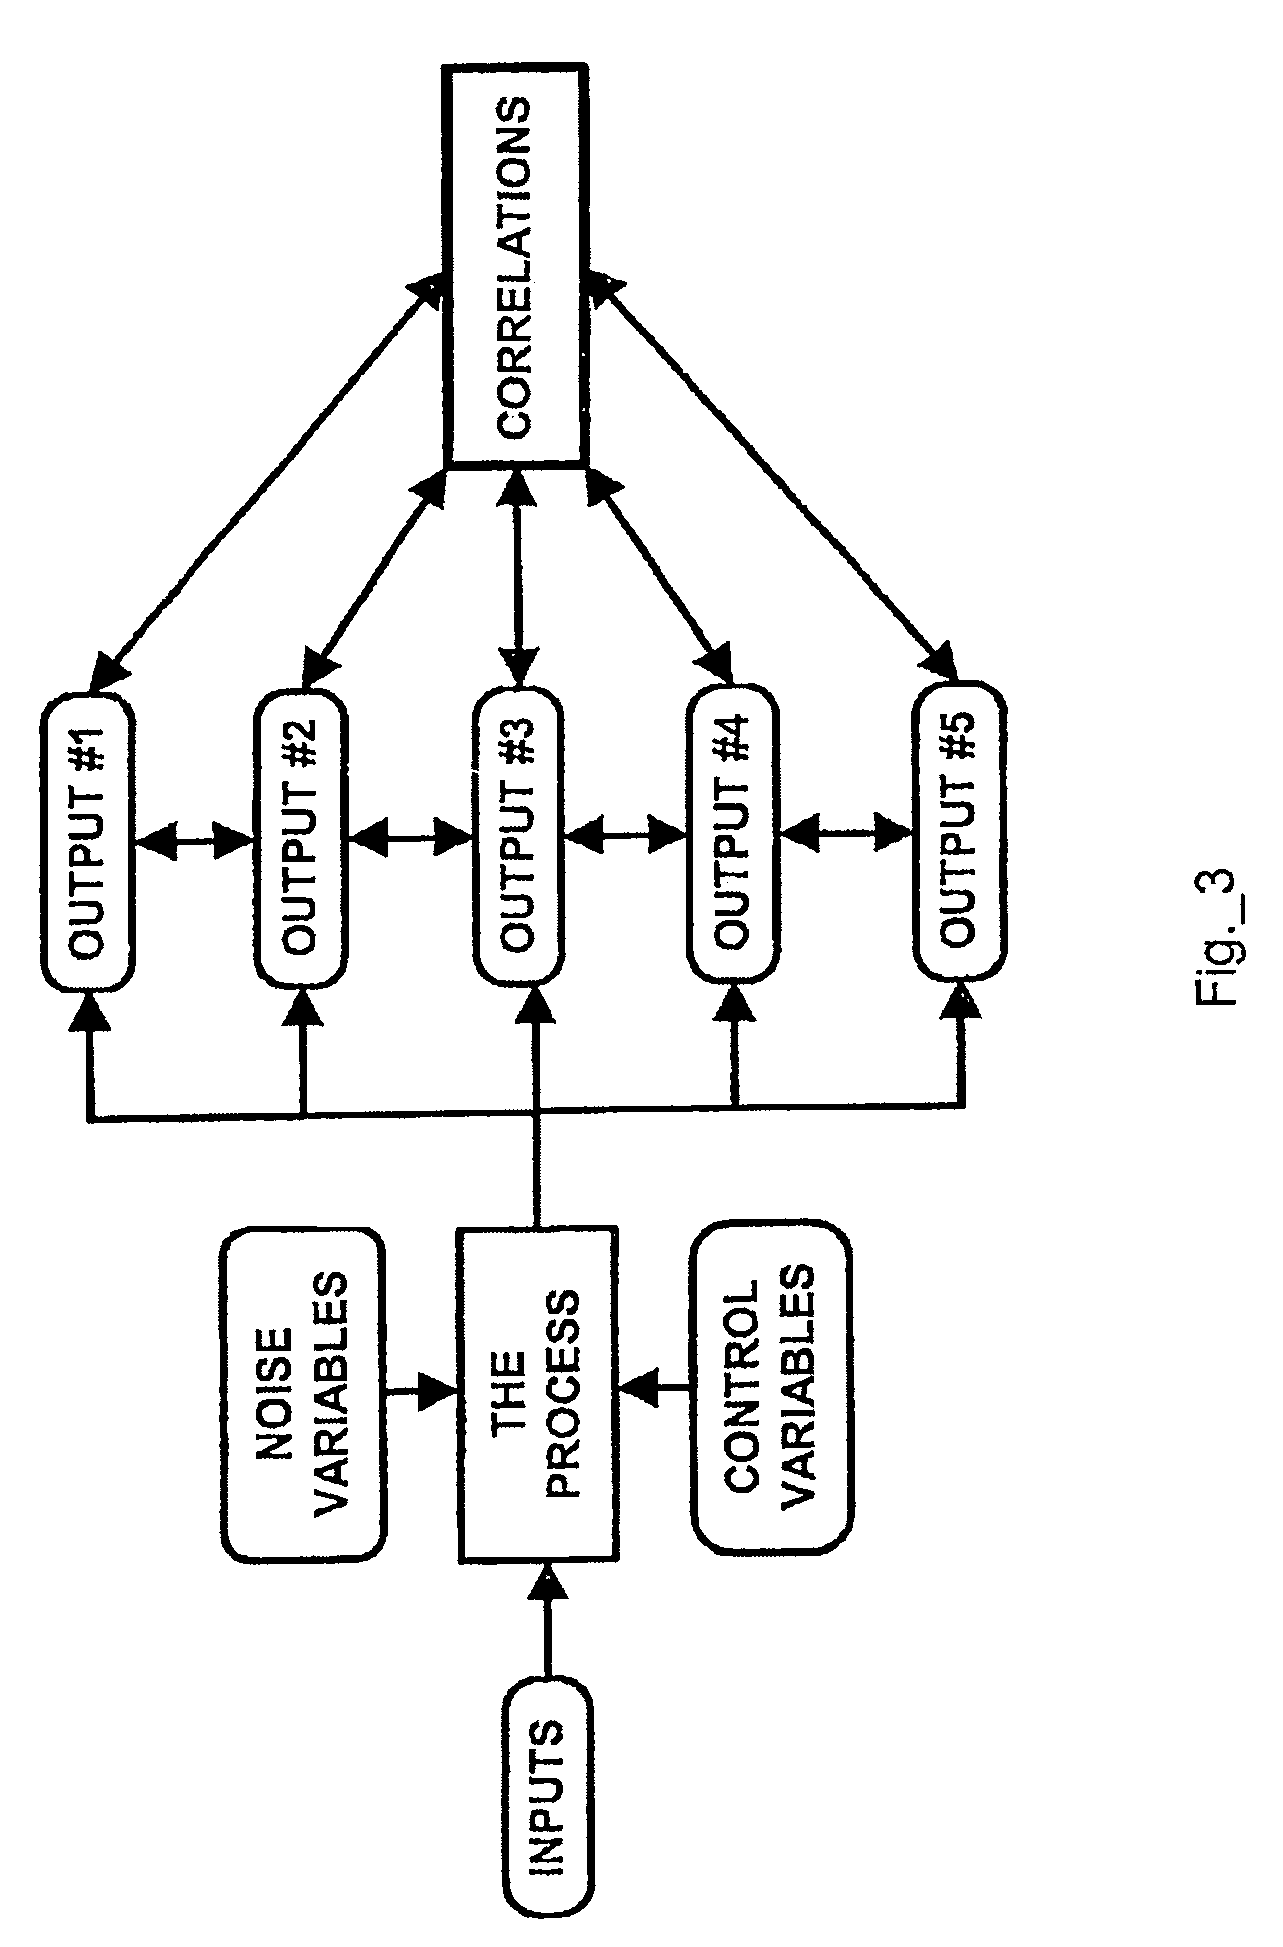 Dynamic control system for manufacturing processes including indirect process variable profiles